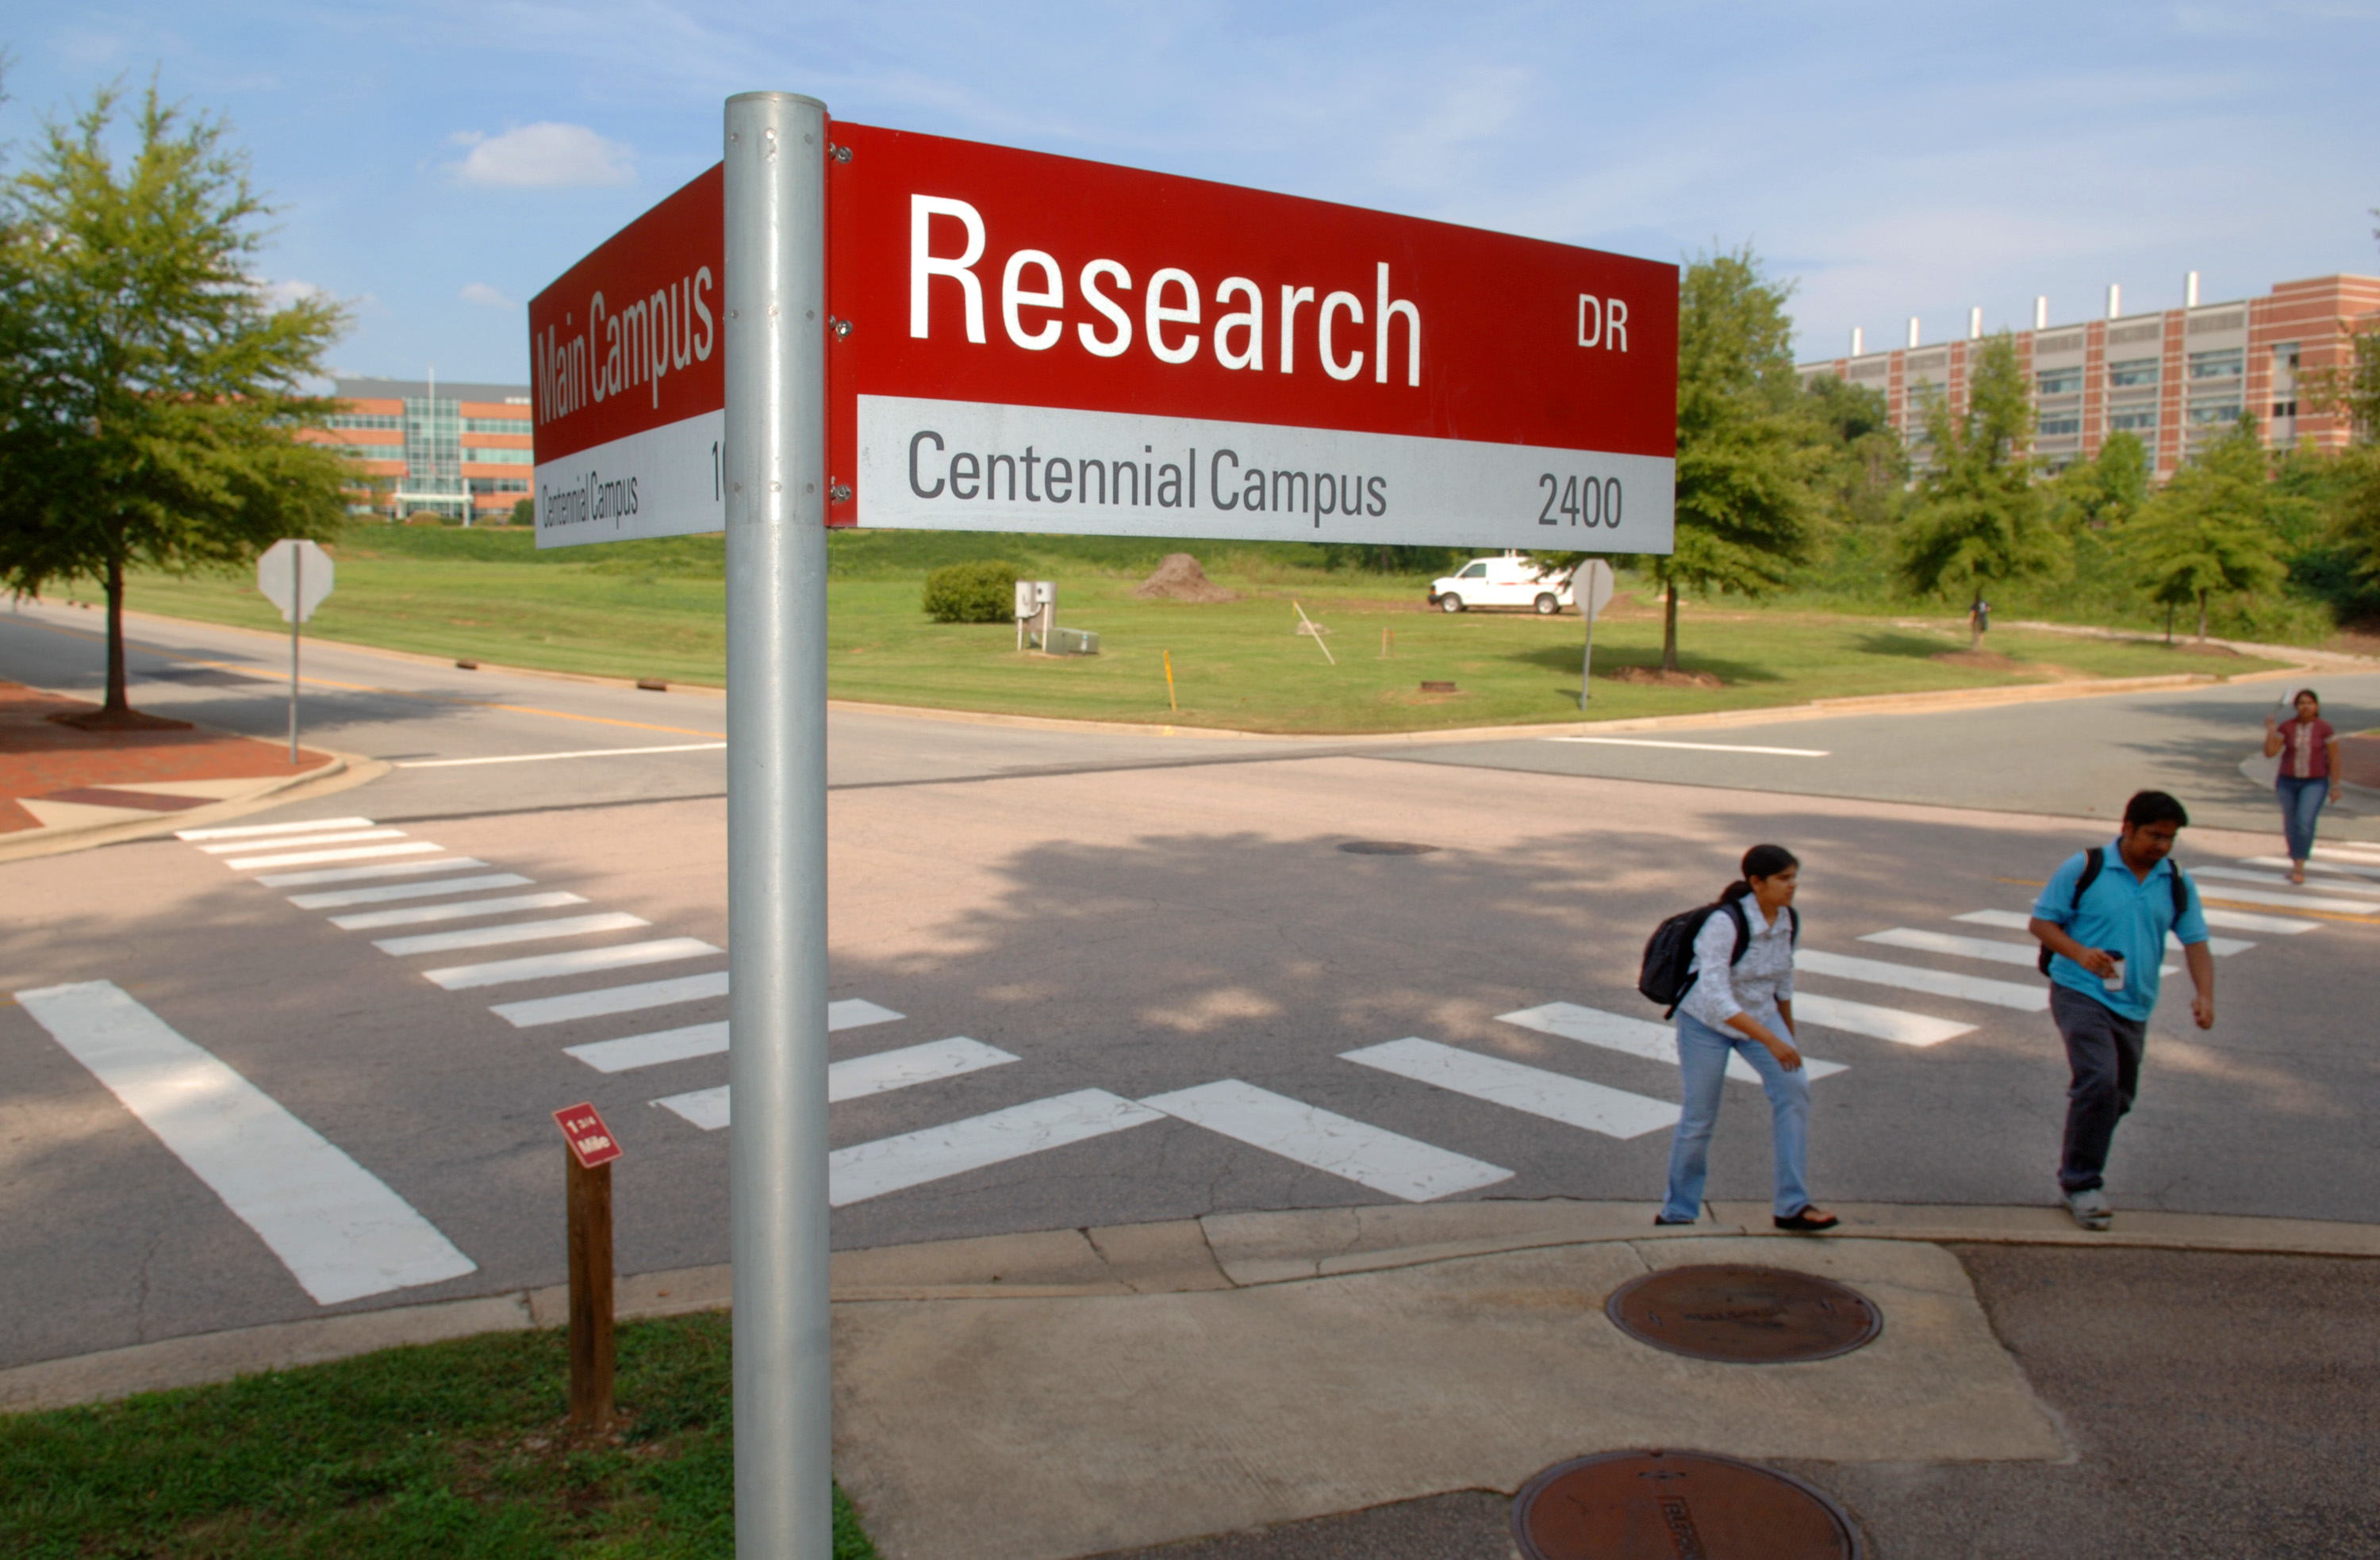 Students make their way across Centennial Campus at the corner of research drive